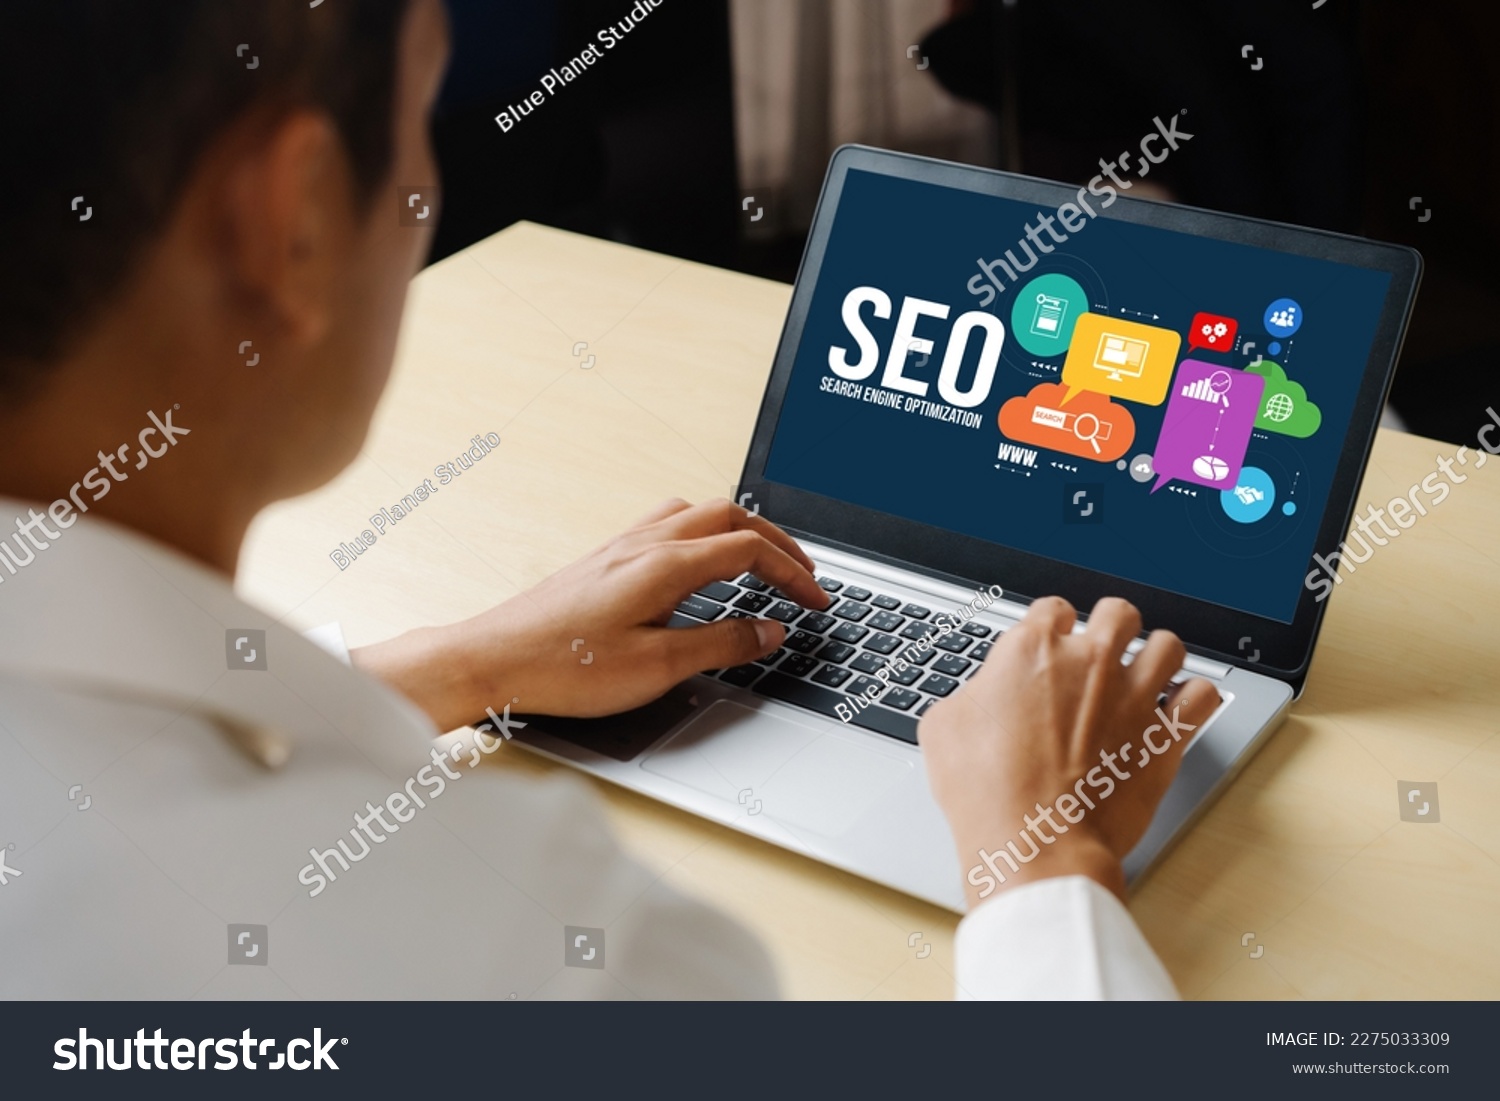 SEO search engine optimization for modish e-commerce and online retail business showing on computer screen #2275033309